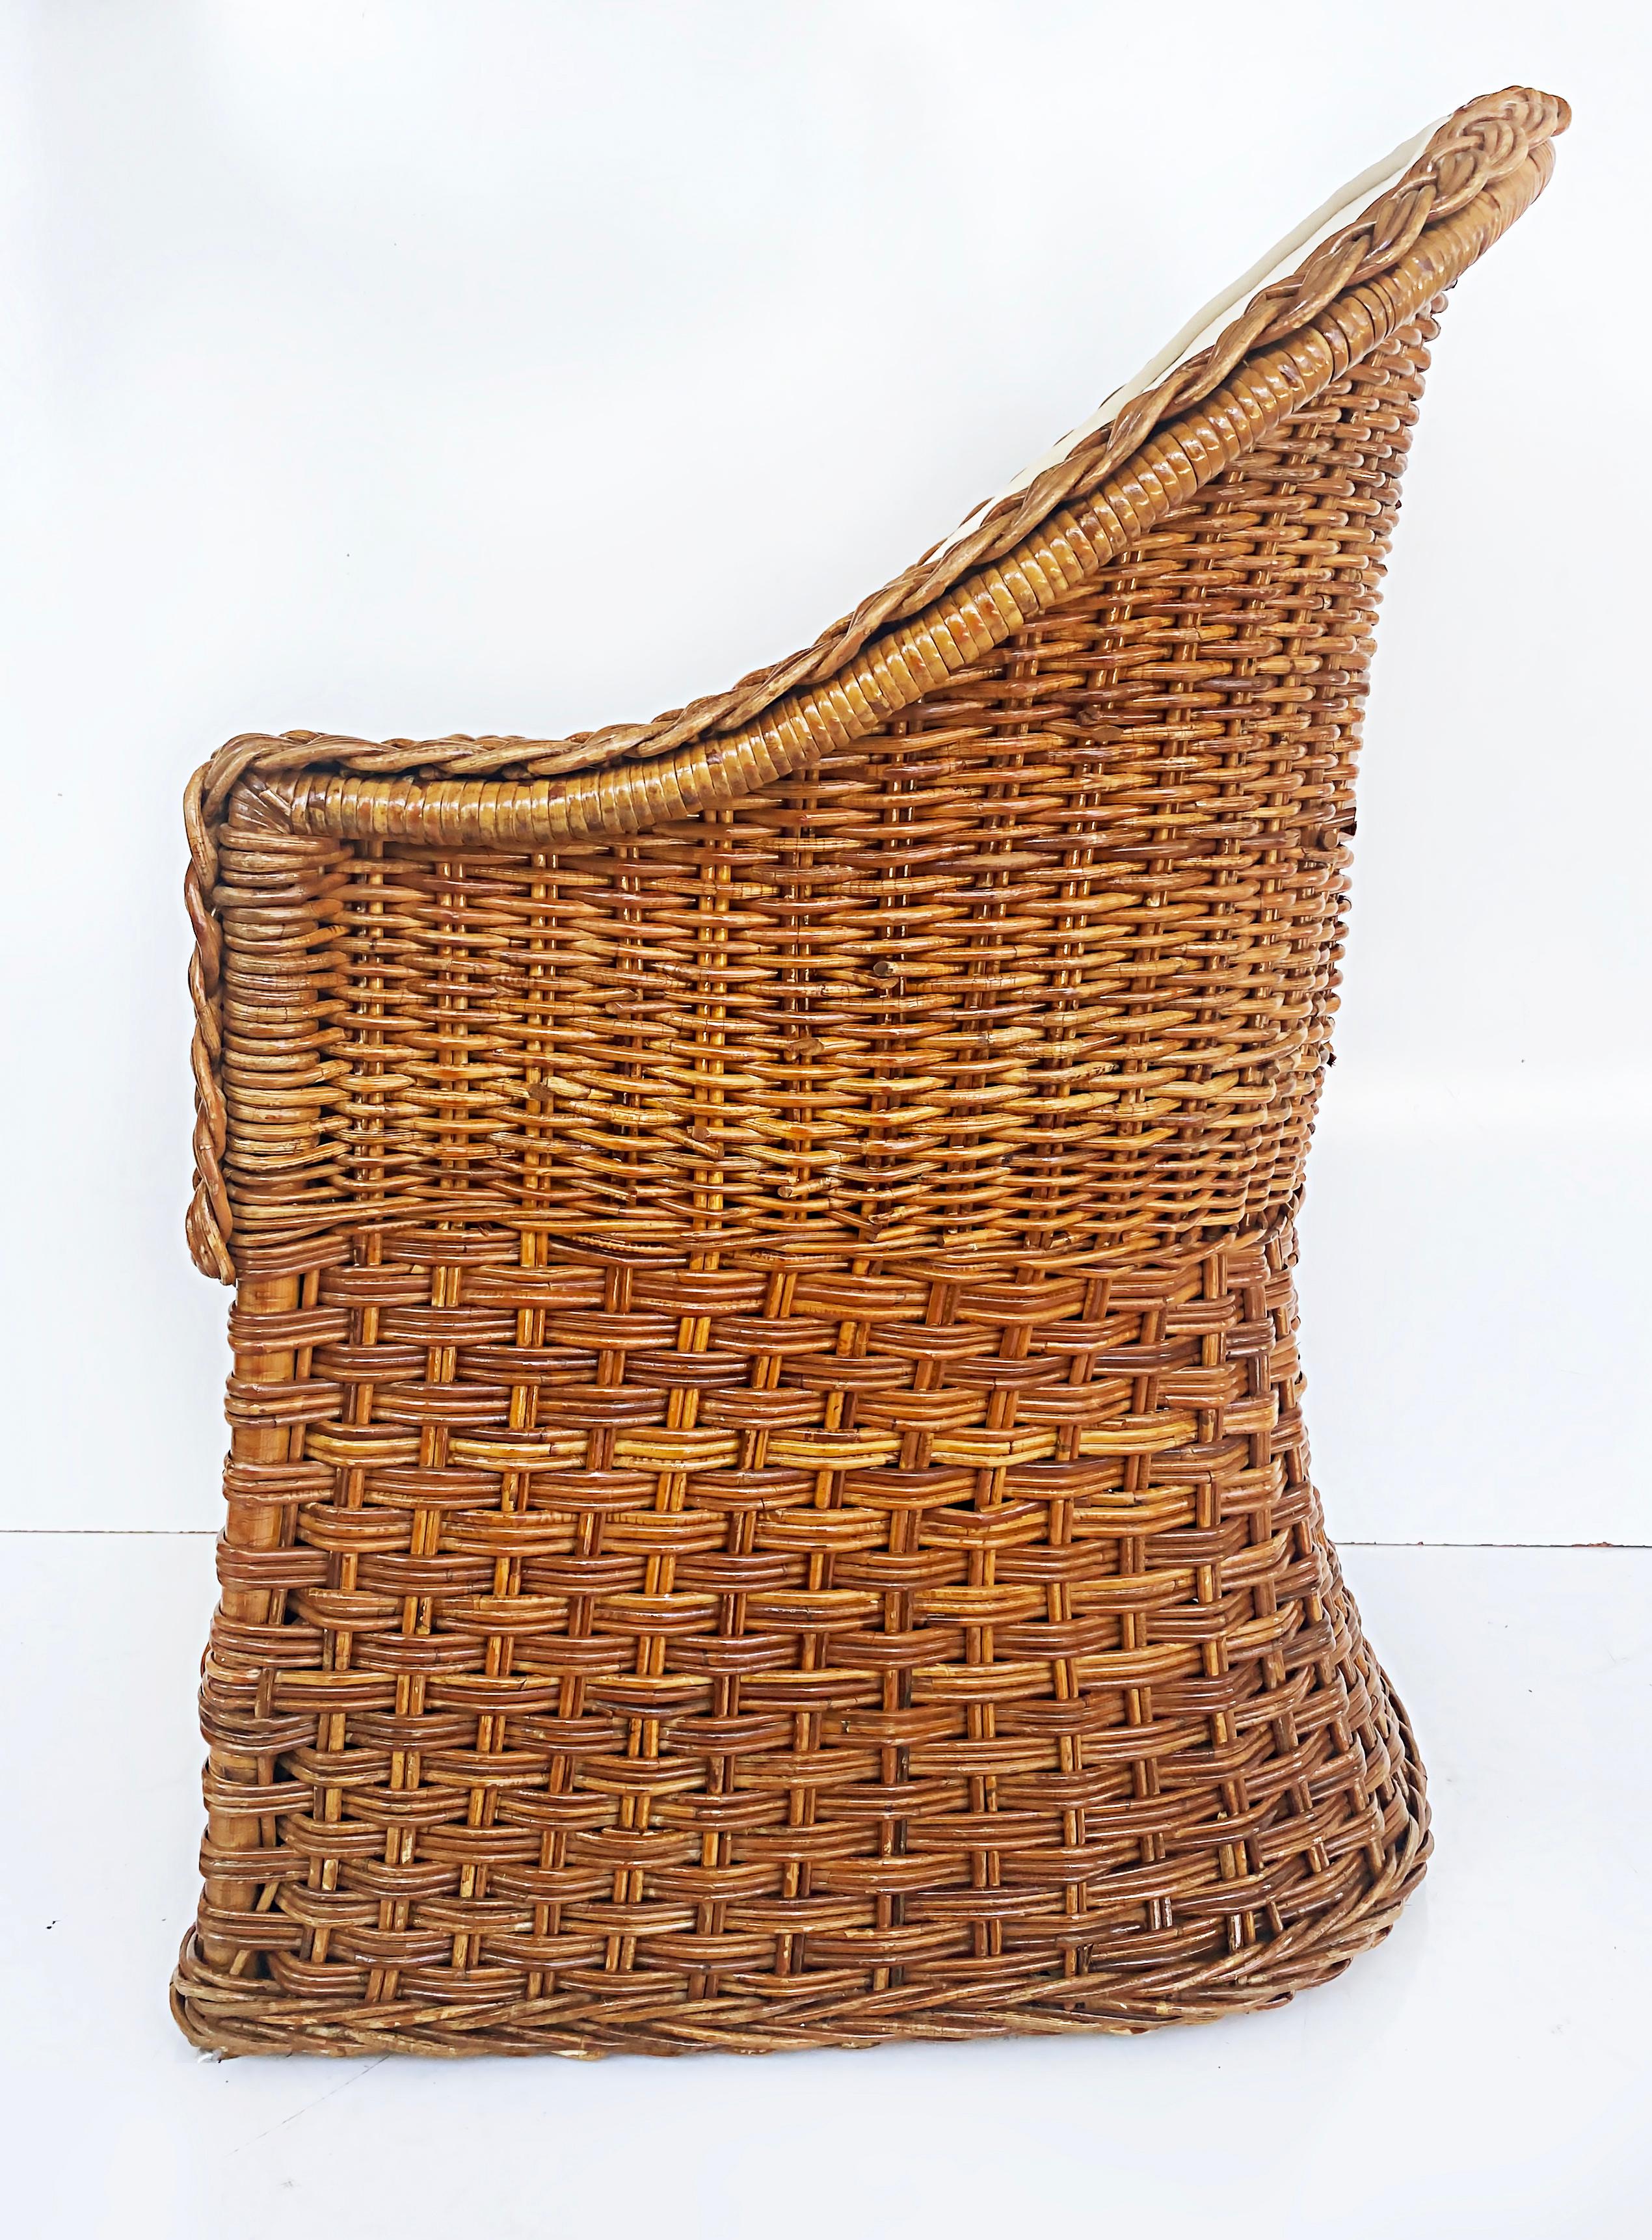 20th Century Wicker Works Braided Rattan Club Chairs, New Upholstery, 1 Pair Available For Sale